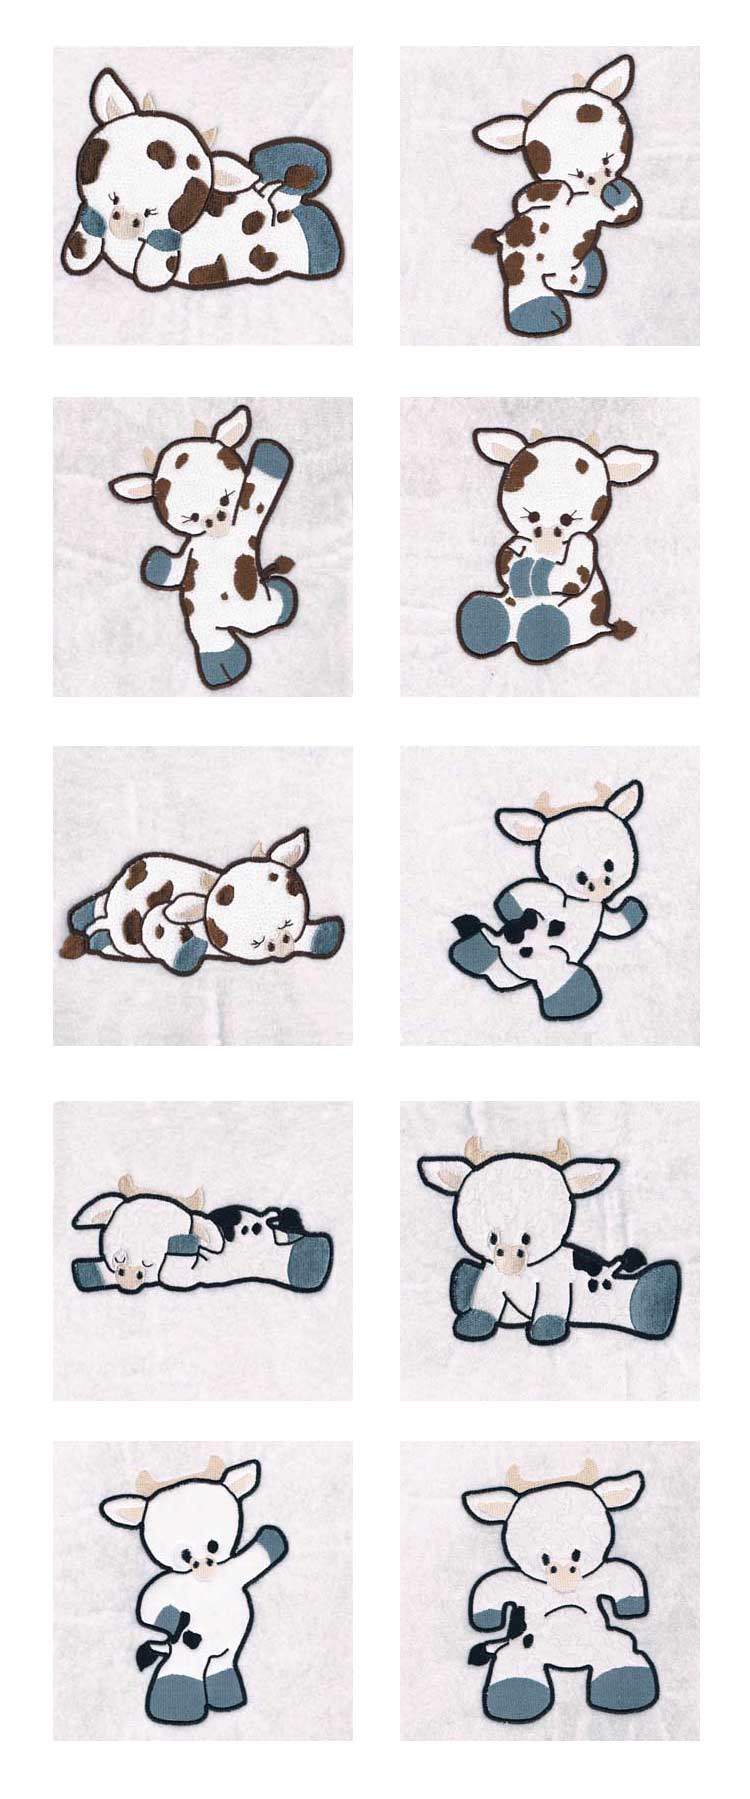 Cute Cows and Bulls Embroidery Machine Design Details